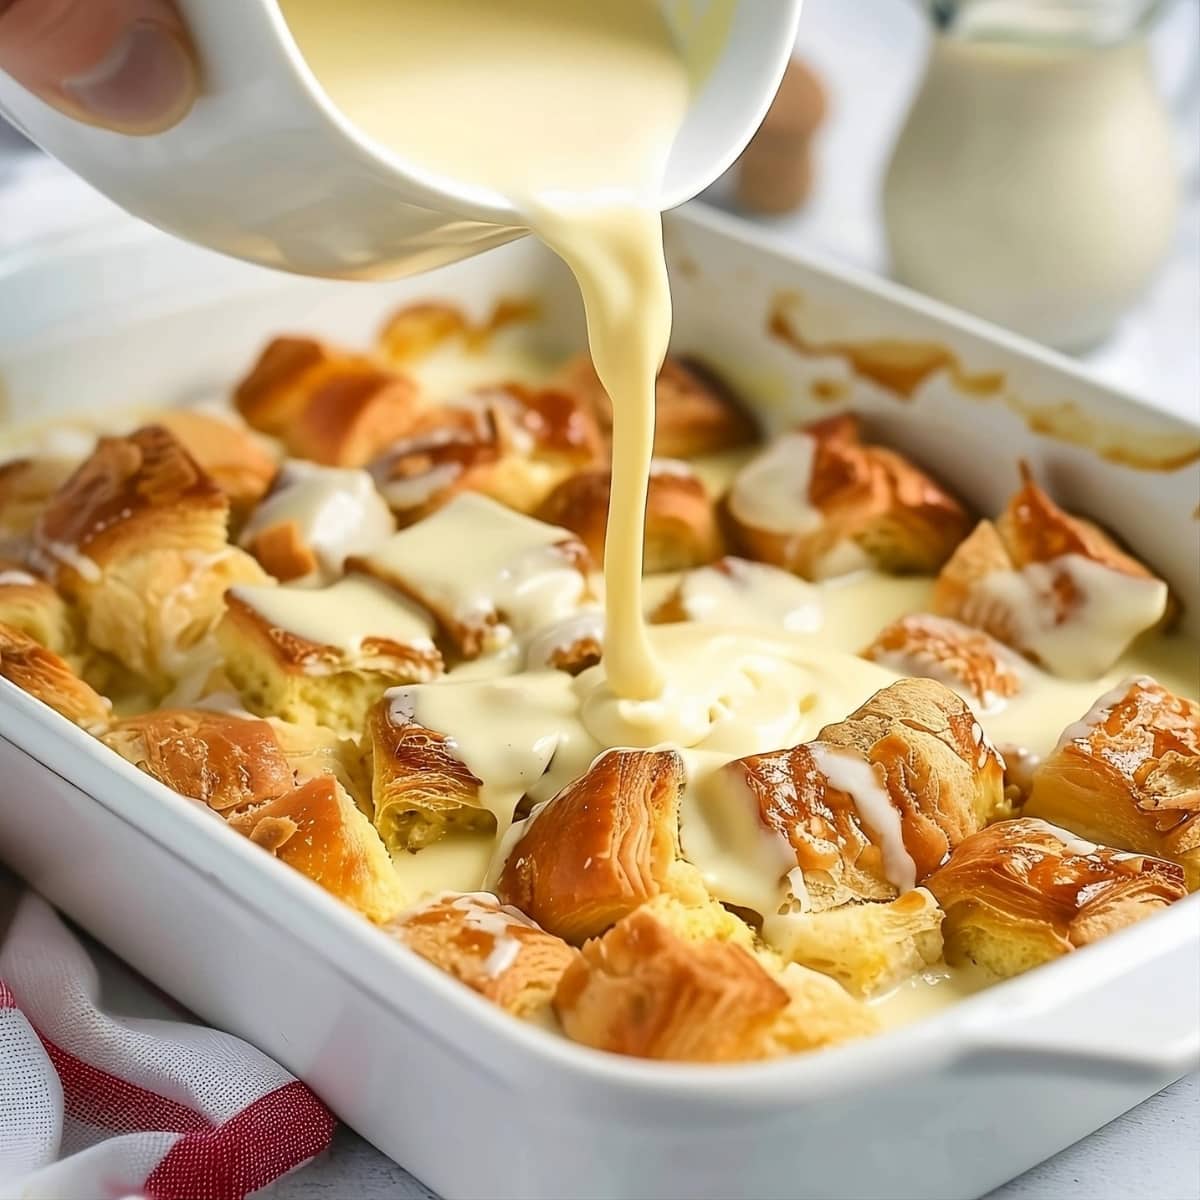 Creamy milk mixture poured in a baking dish with cubes of croissant